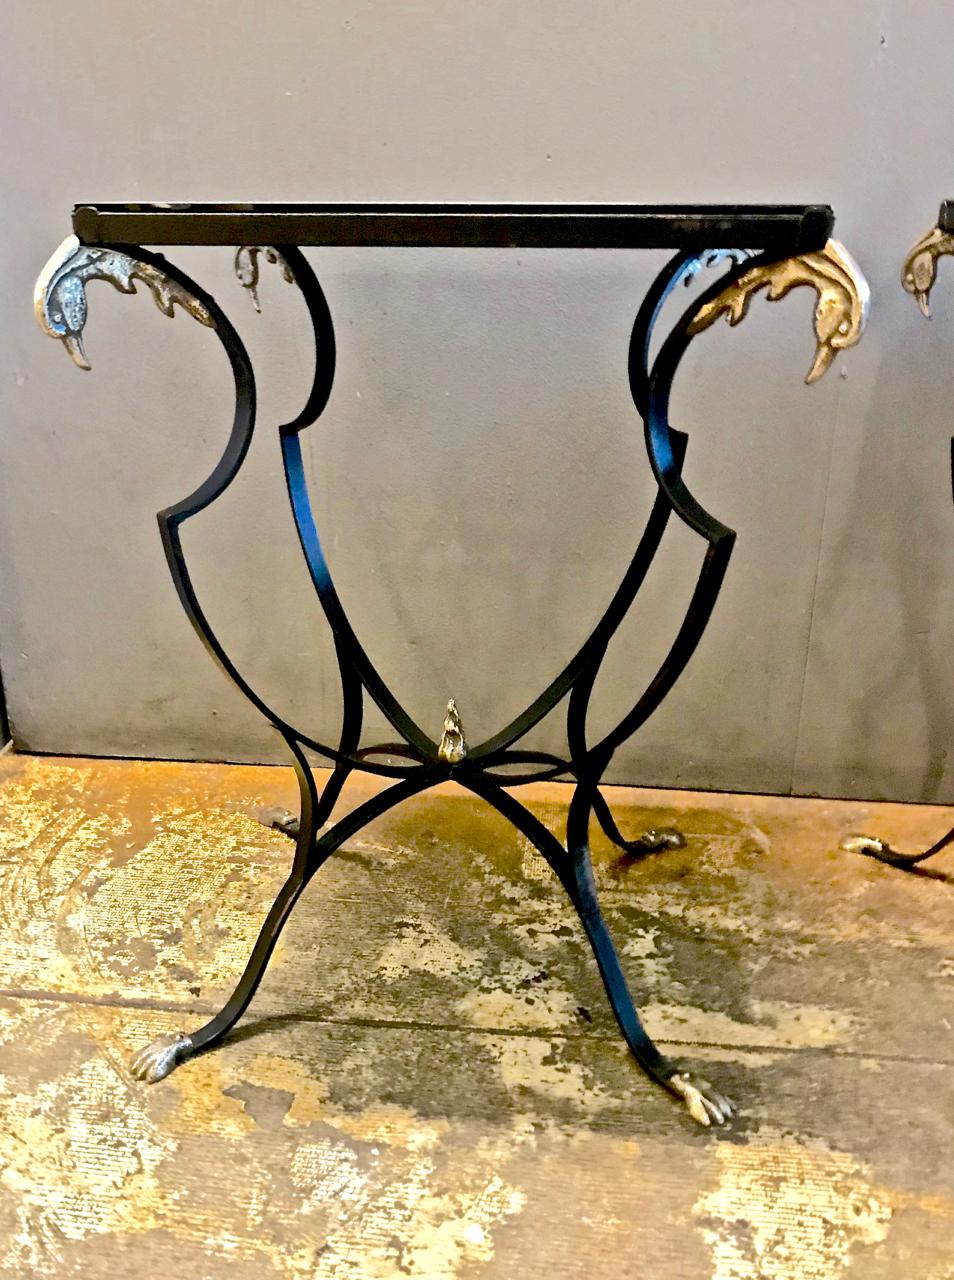 This is a superb pair of early 20th century French forged iron side tables detailed with cast brass phoenix finials and paw feet. The table is in excellent overall original condition with just the right amount of patina. The graceful forged iron